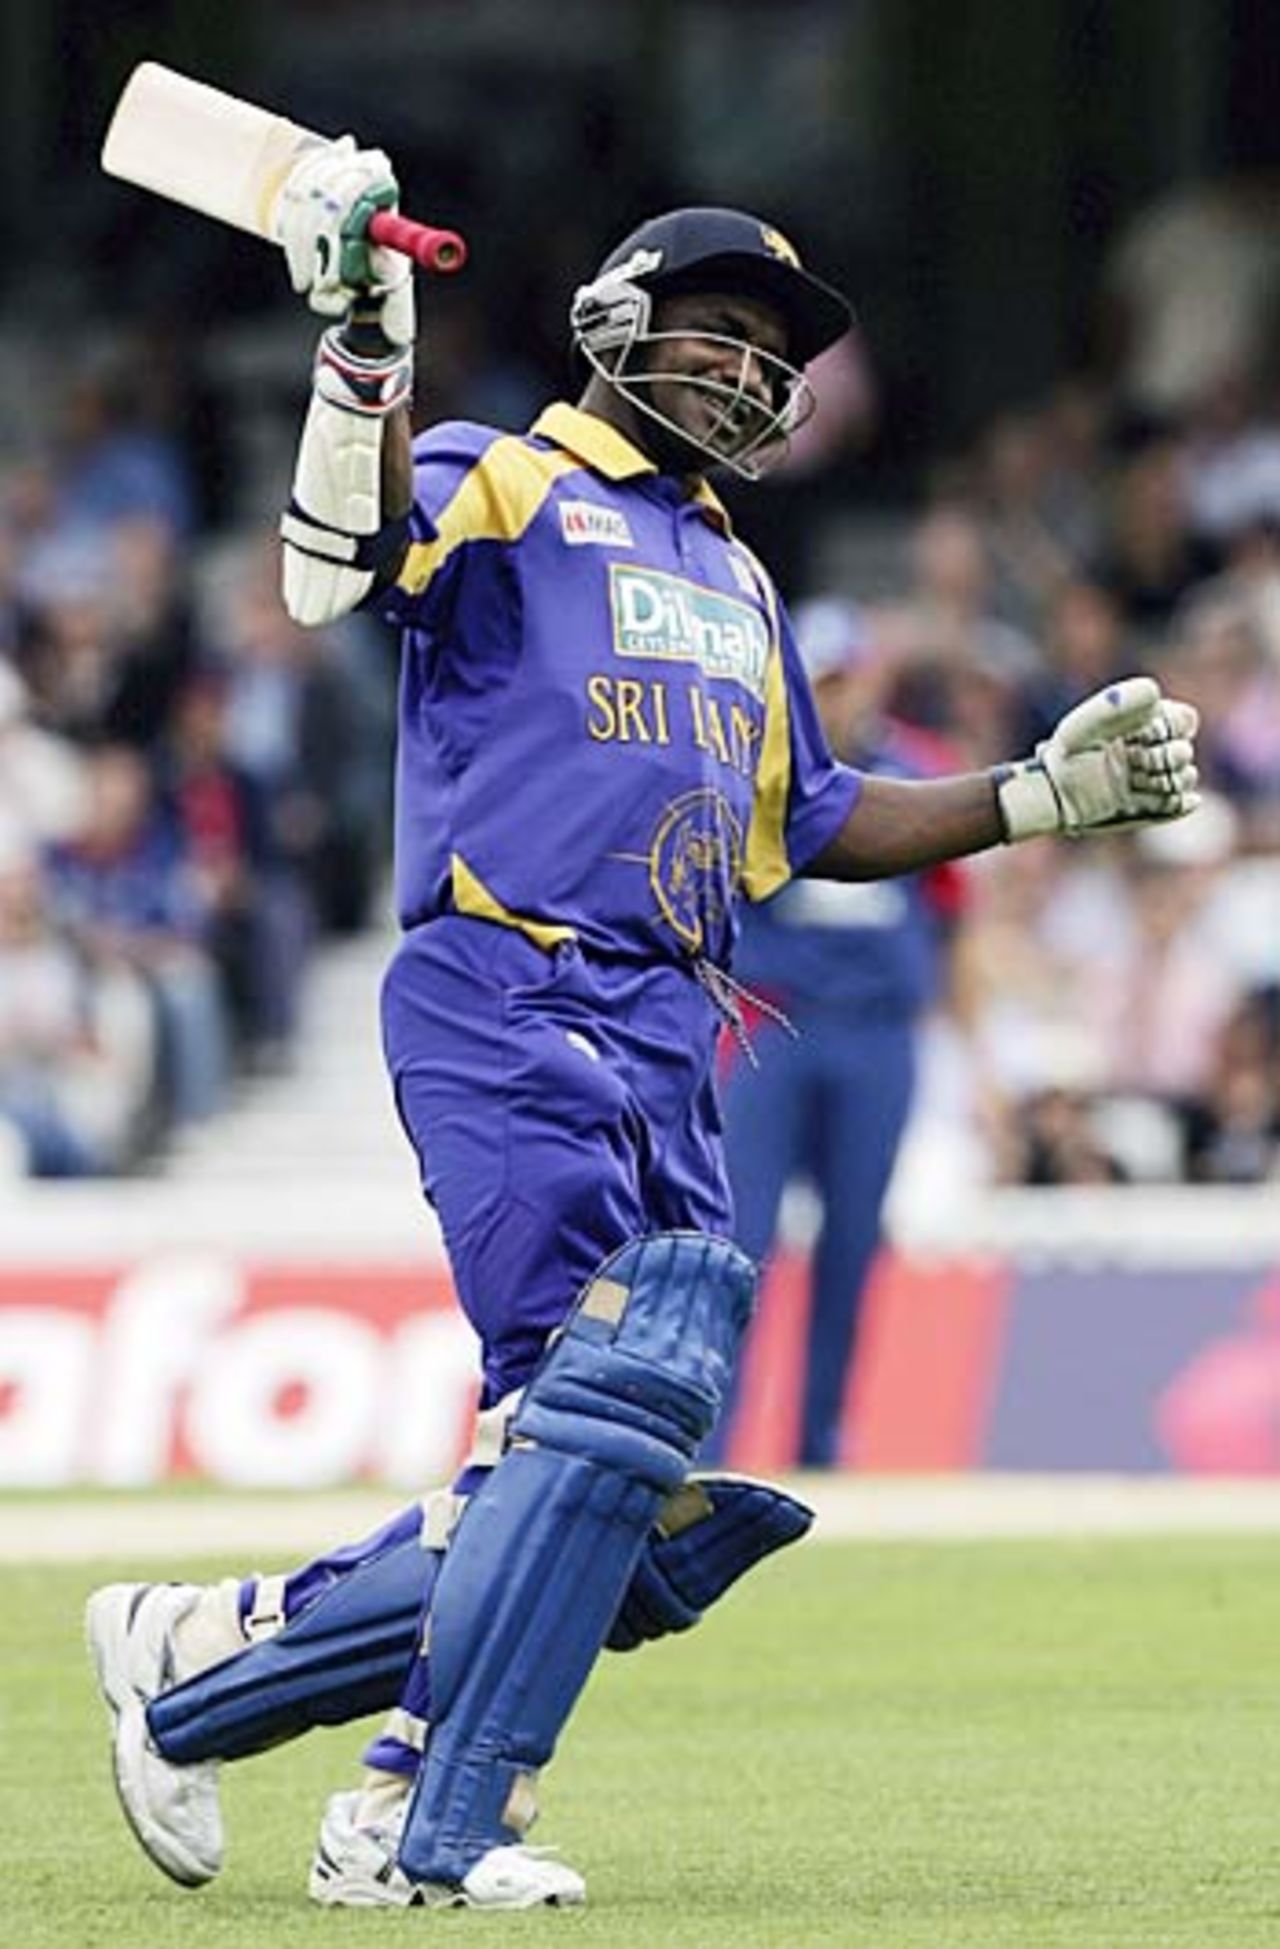 Sanath Jayasuriya has rediscovered top form - will he top-score at Old Trafford on Wednesday?